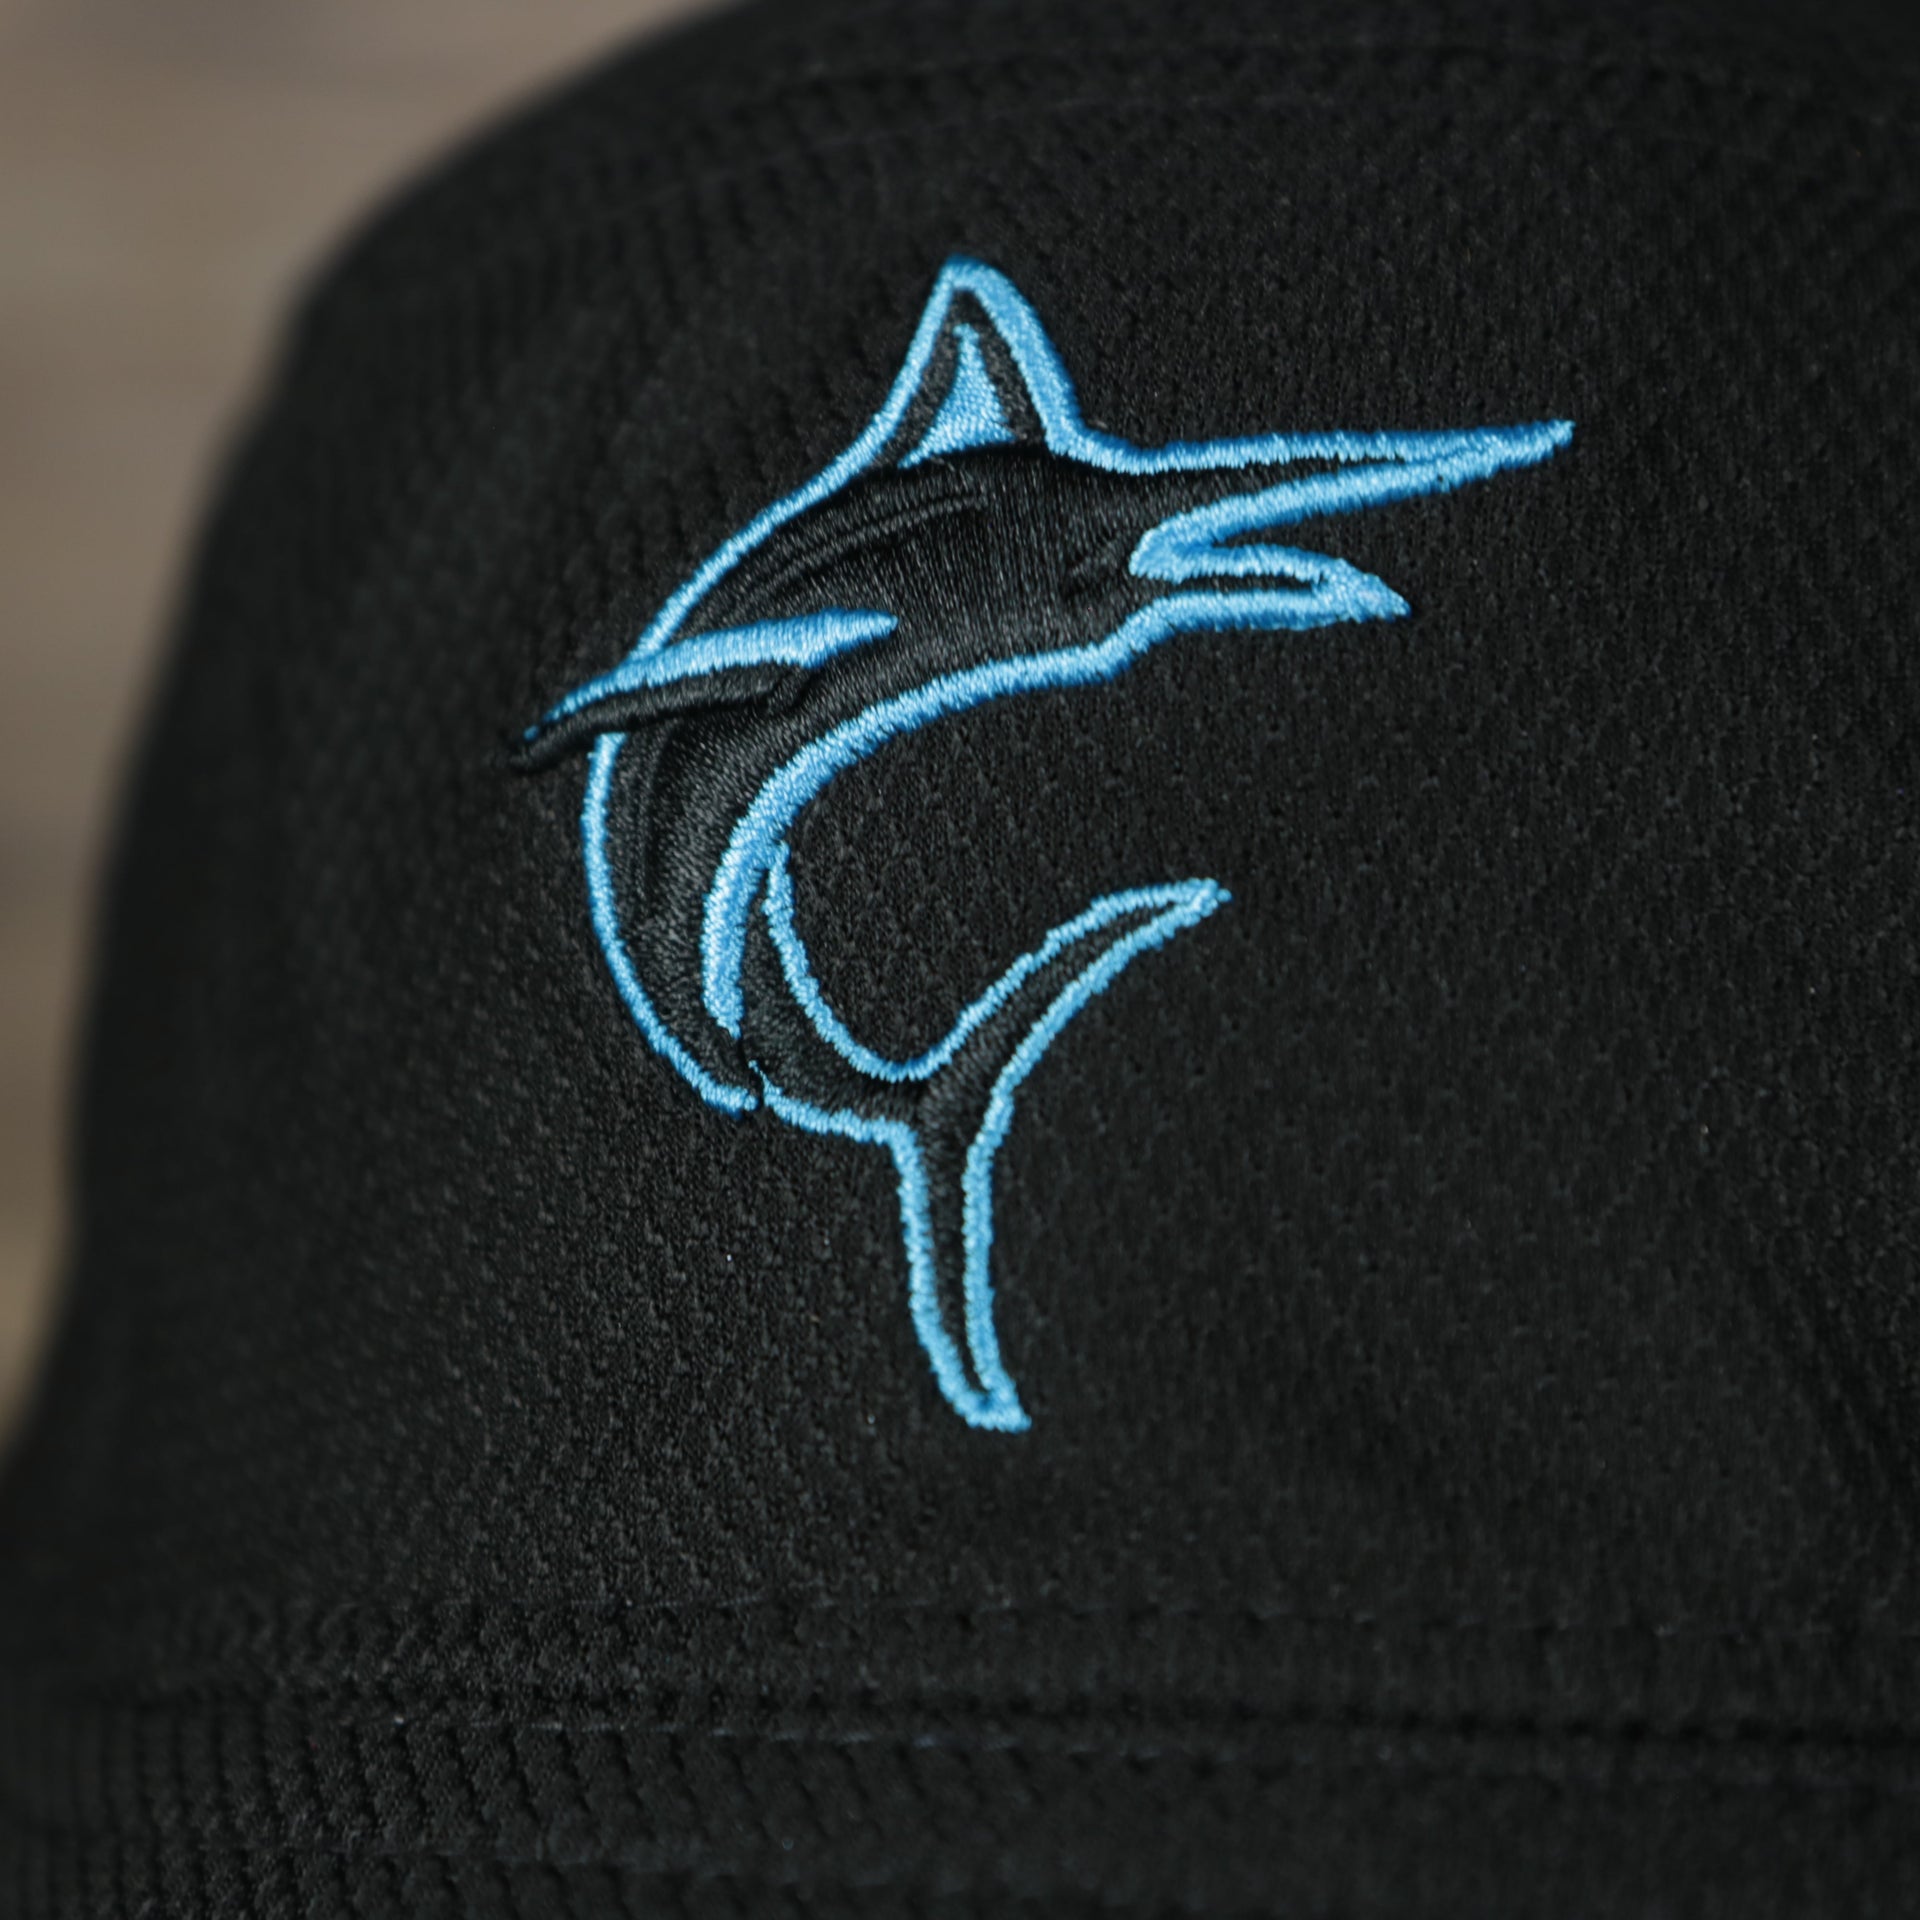 A close up of the Marlins logo on the Miami Marlins MLB 2022 Spring Training Onfield Bucket Hat